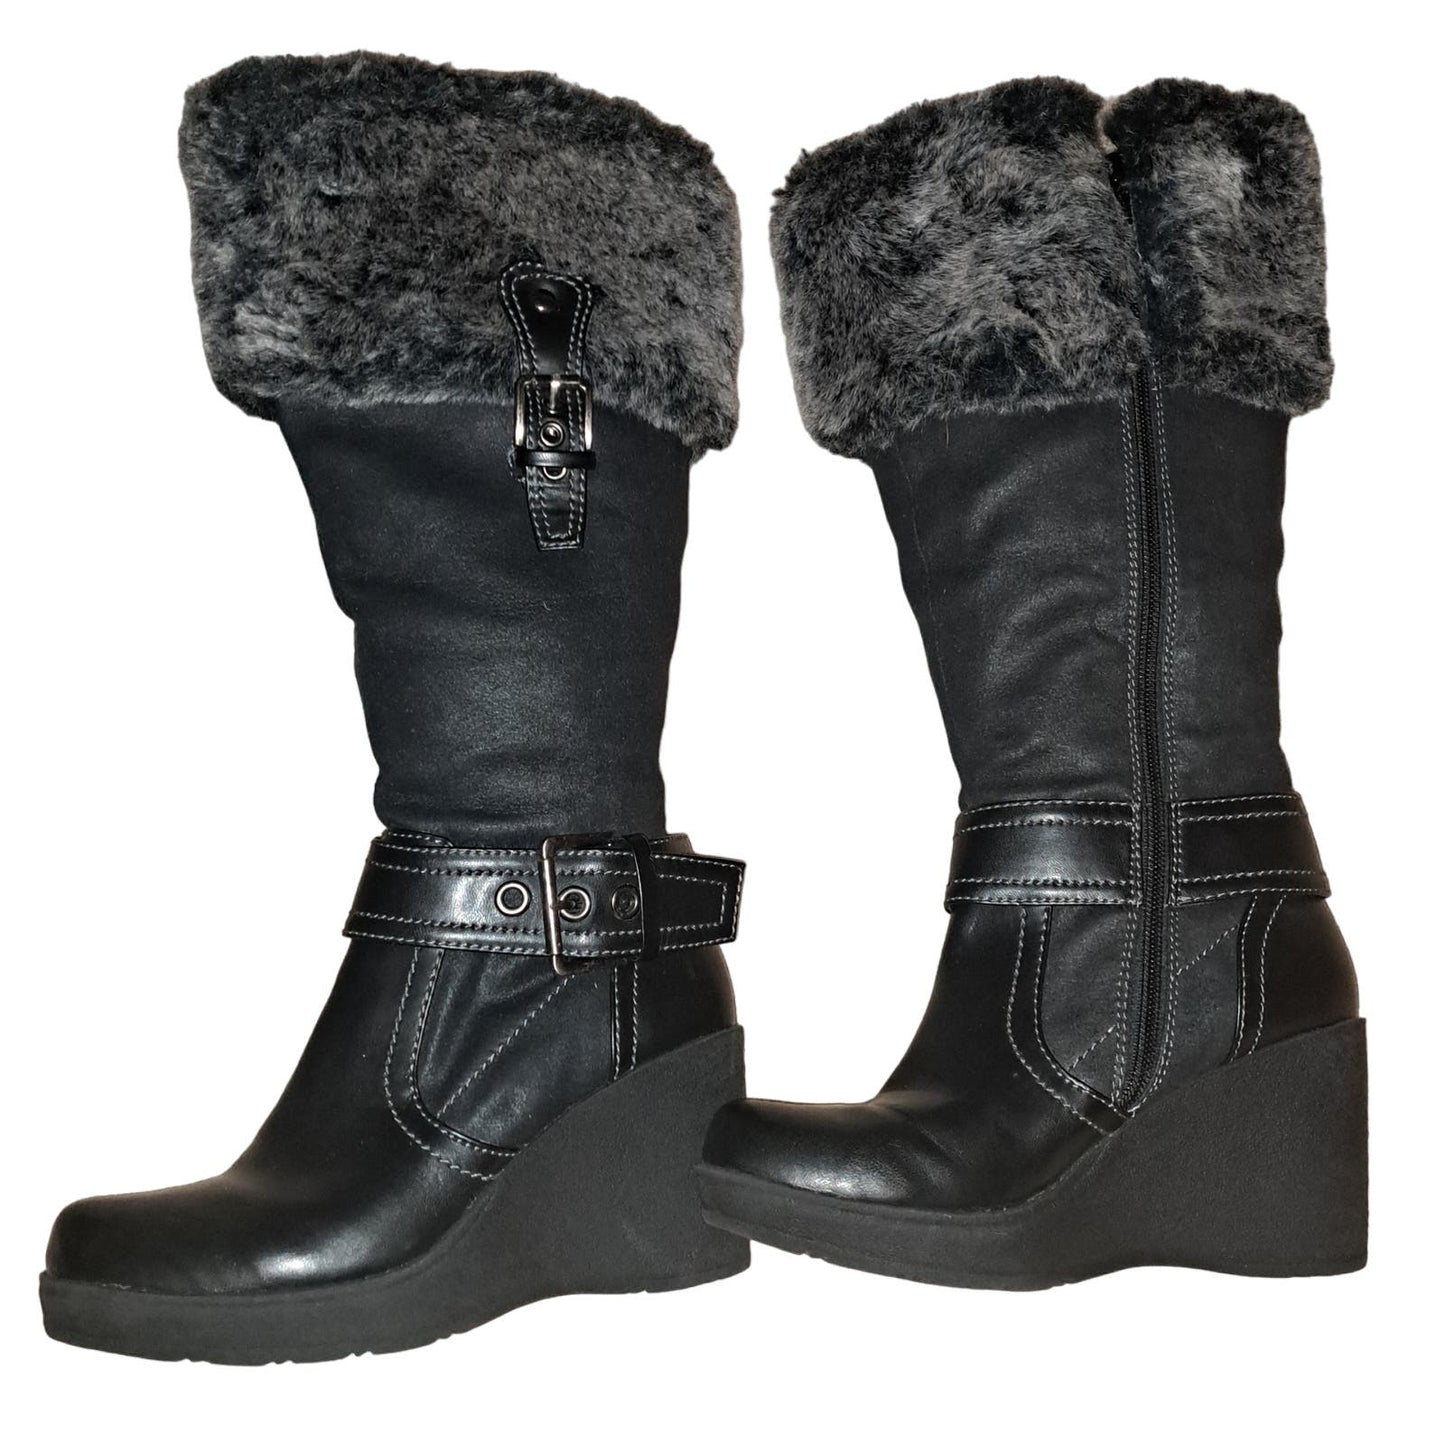 NEW Size 6 Med Black So Wear IT Declare IT Black Tall Fur Topped Boots